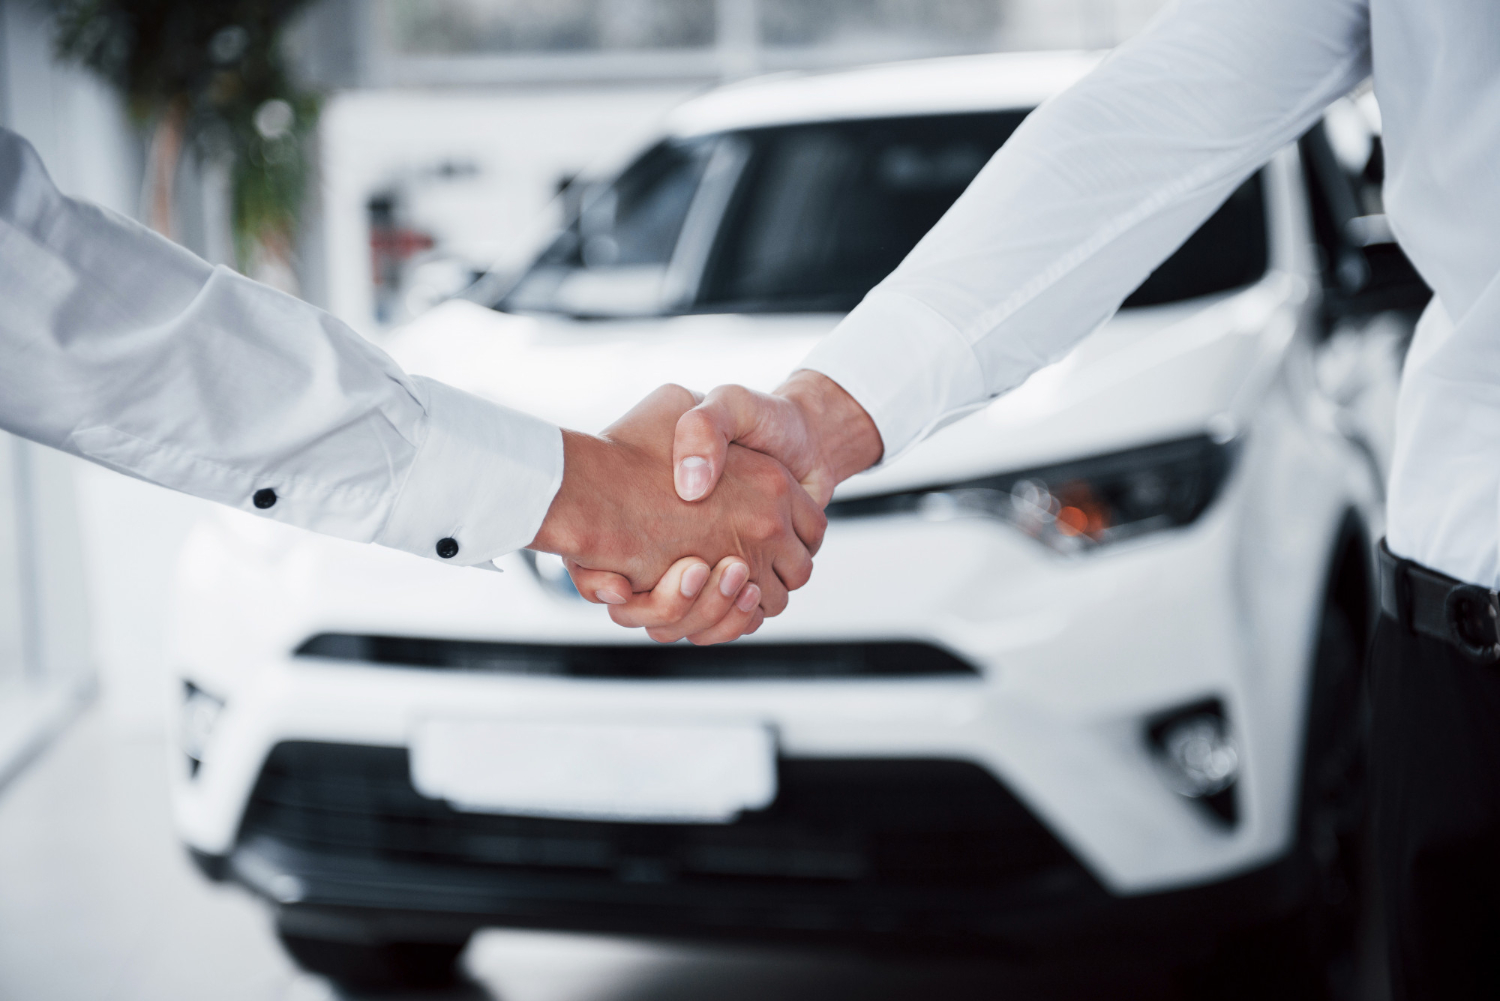 Auto Retail Sales Figures For May Month Encouraging, Though Behind Pre-Covid Numbers: FADA Report